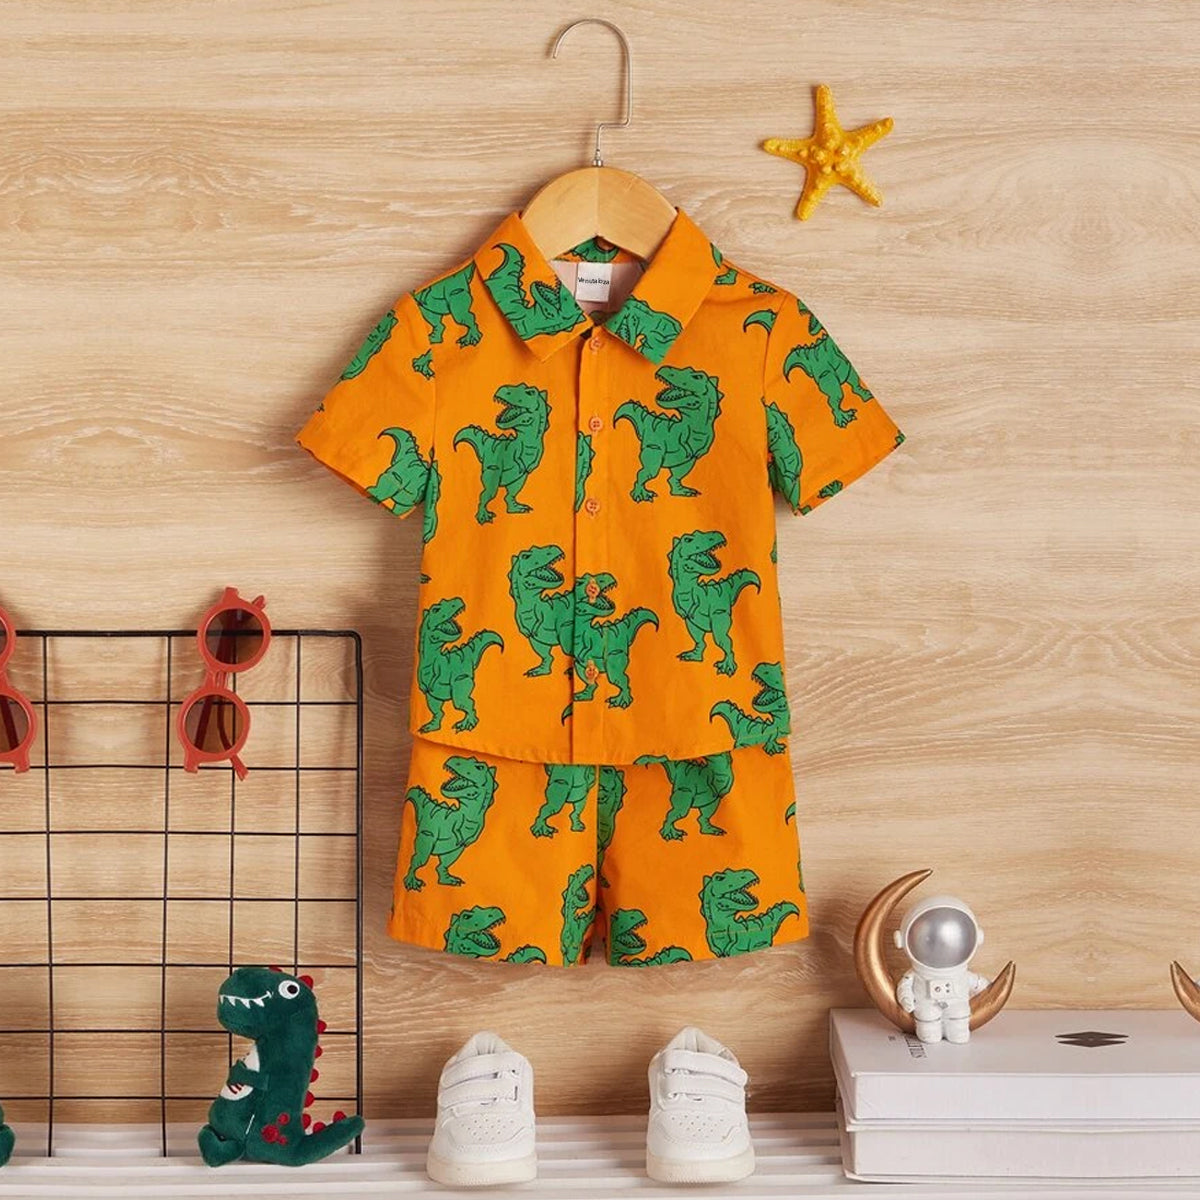 Venutaloza Baby Set Panda & Dinosaur-Apricot-Colored (Combo Pack Of 3) Casual Printed Shirt & Shorts Without tee Two Piece Set For Boy & Girls.